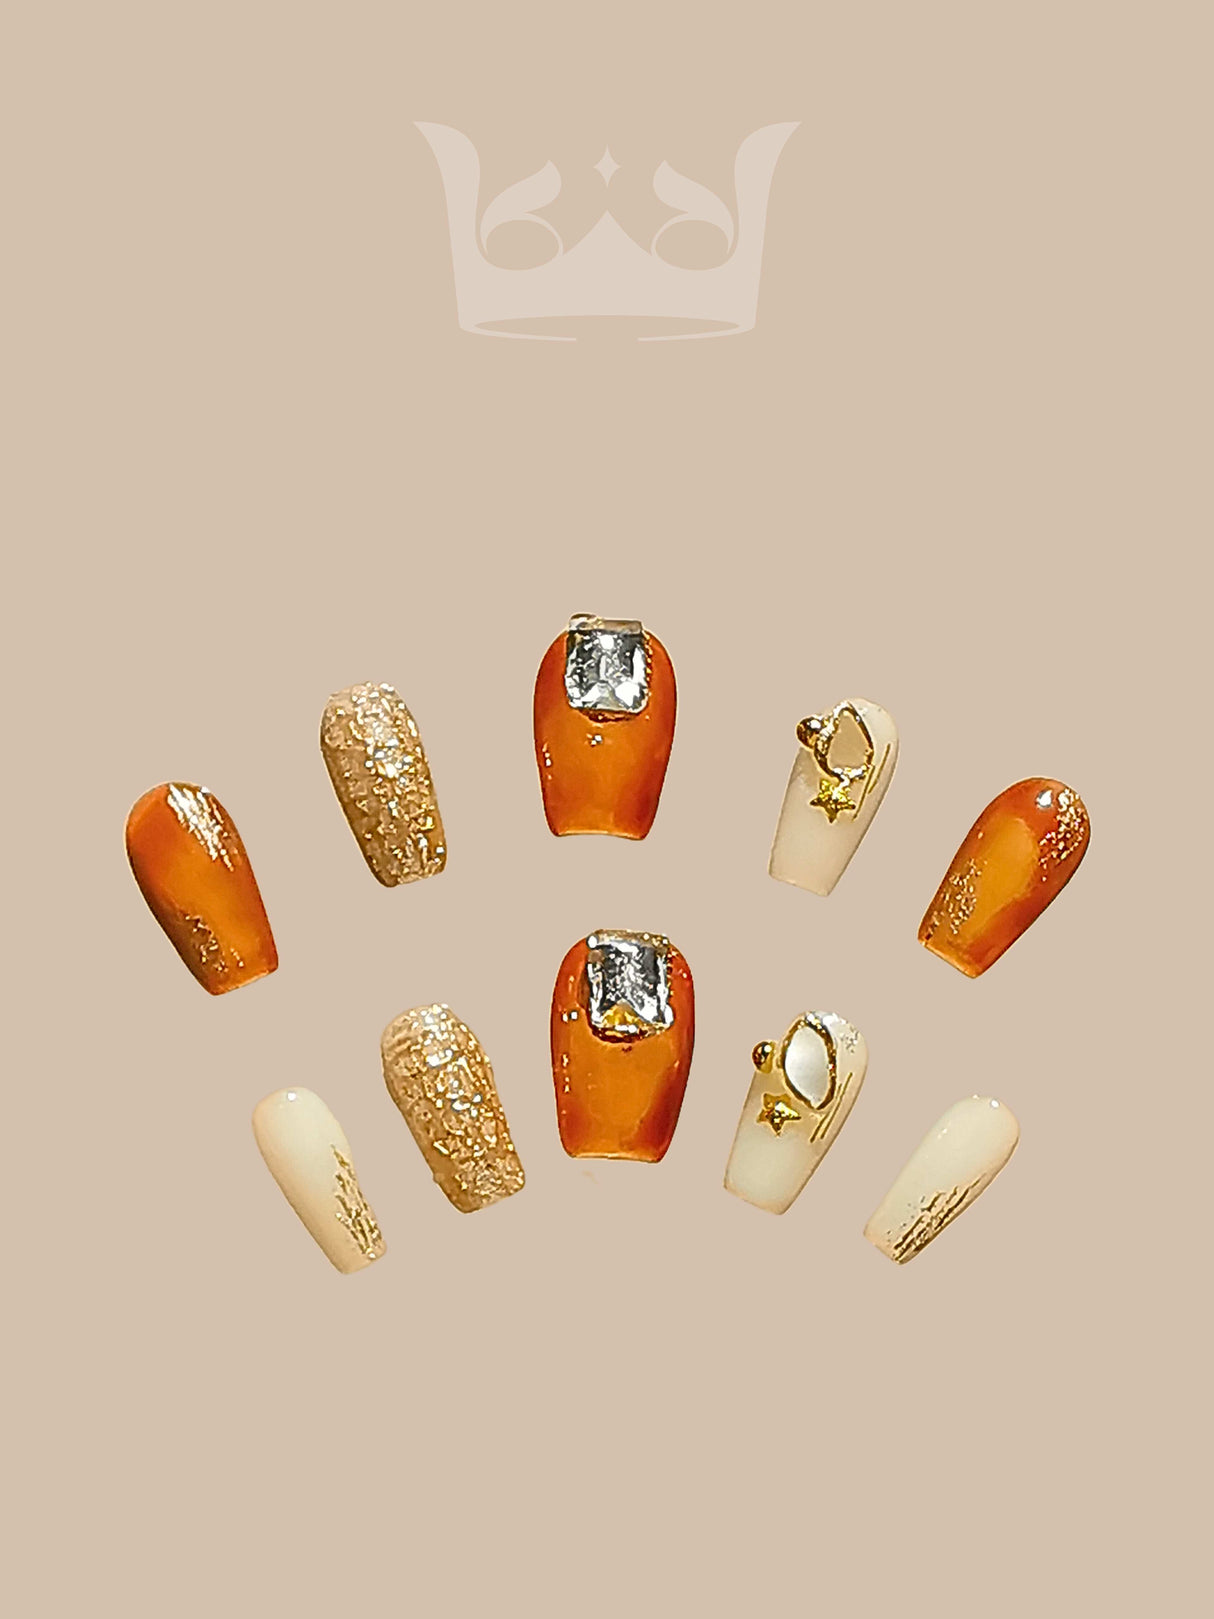 Luxurious and ornate acrylic nails with warm colors, glittery textures, gold foil accents, 3D adornments, and a squared or slightly rounded tip shape for special occasions or fashion statements.